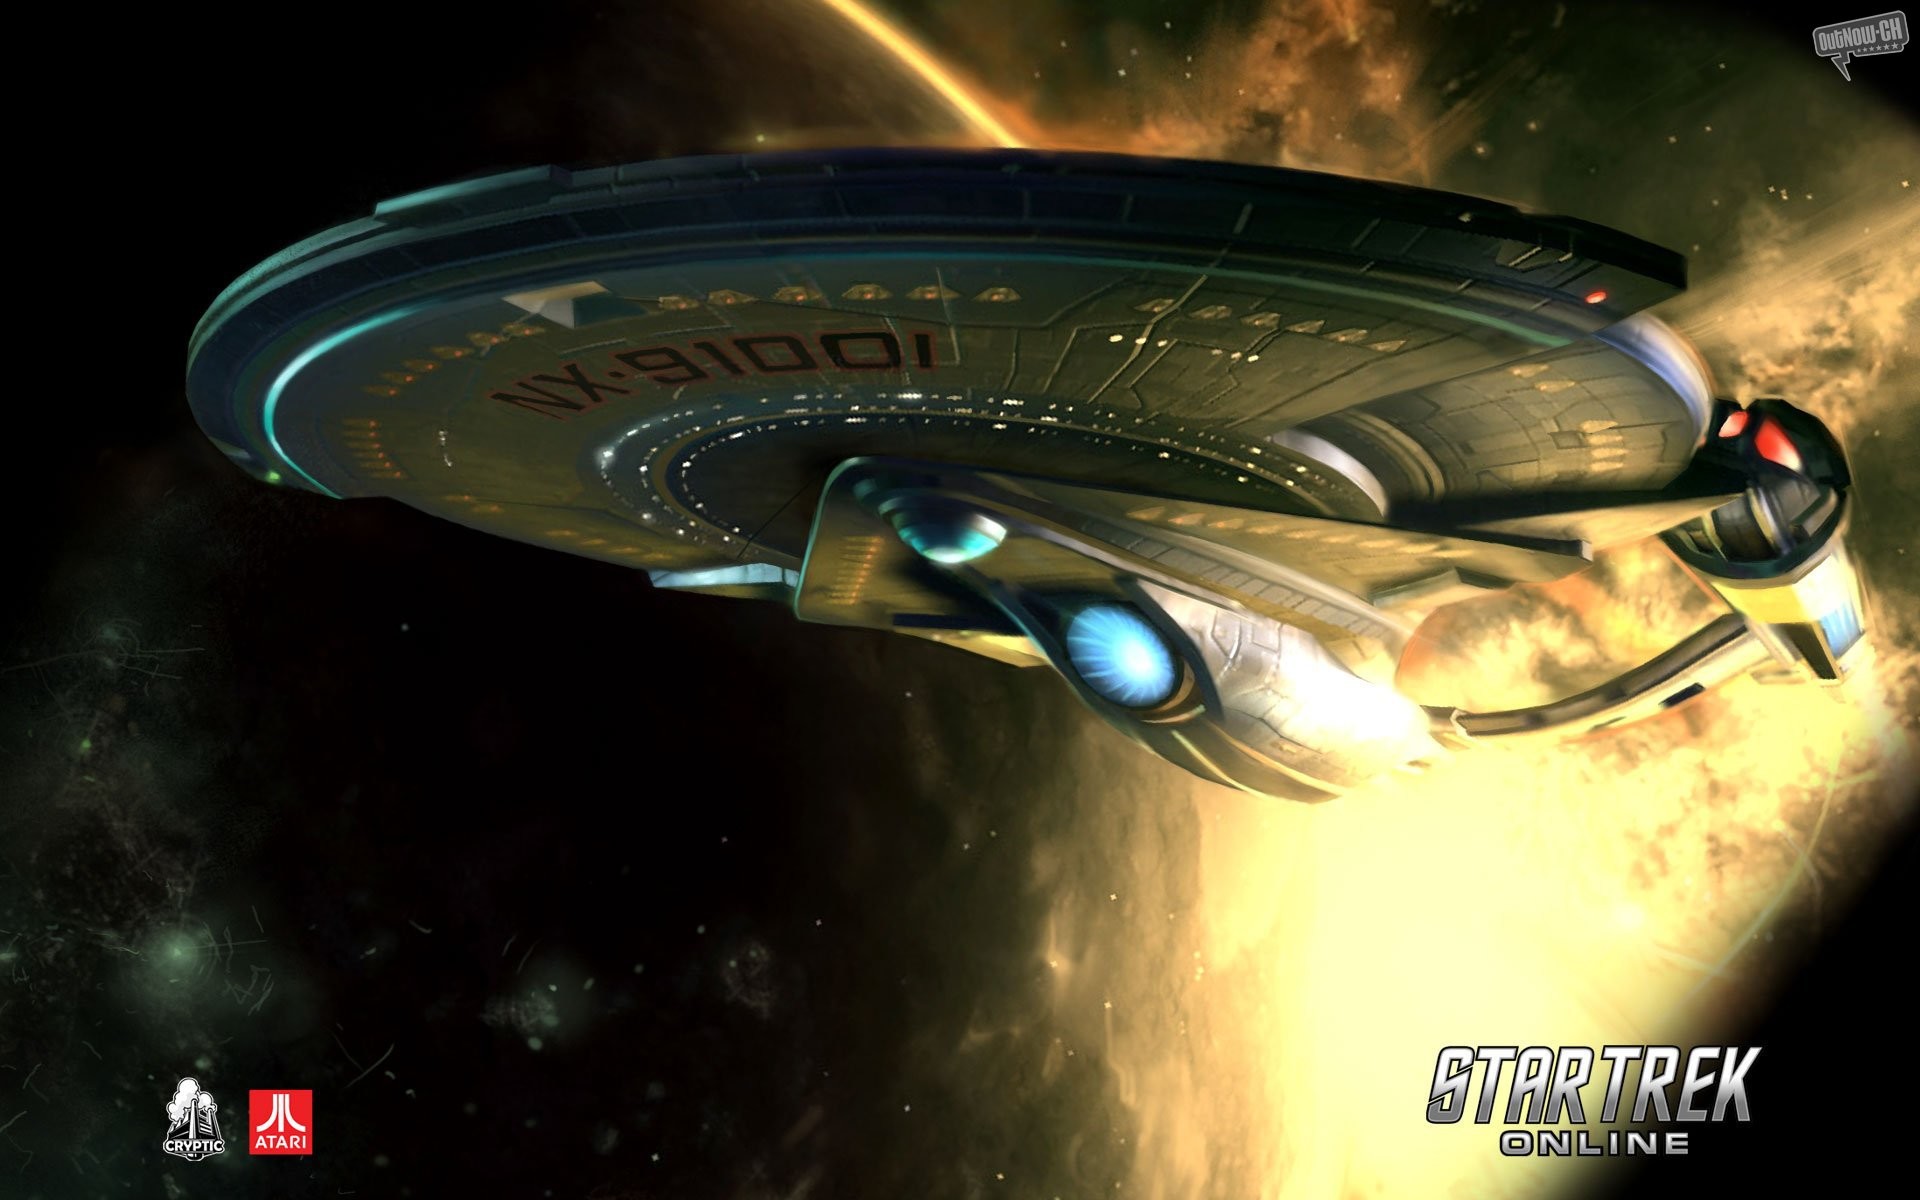 1920x1200  Star Trek: Online. How to set wallpaper on your desktop? Click  the download link from above and set the wallpaper on the desktop from your  OS.